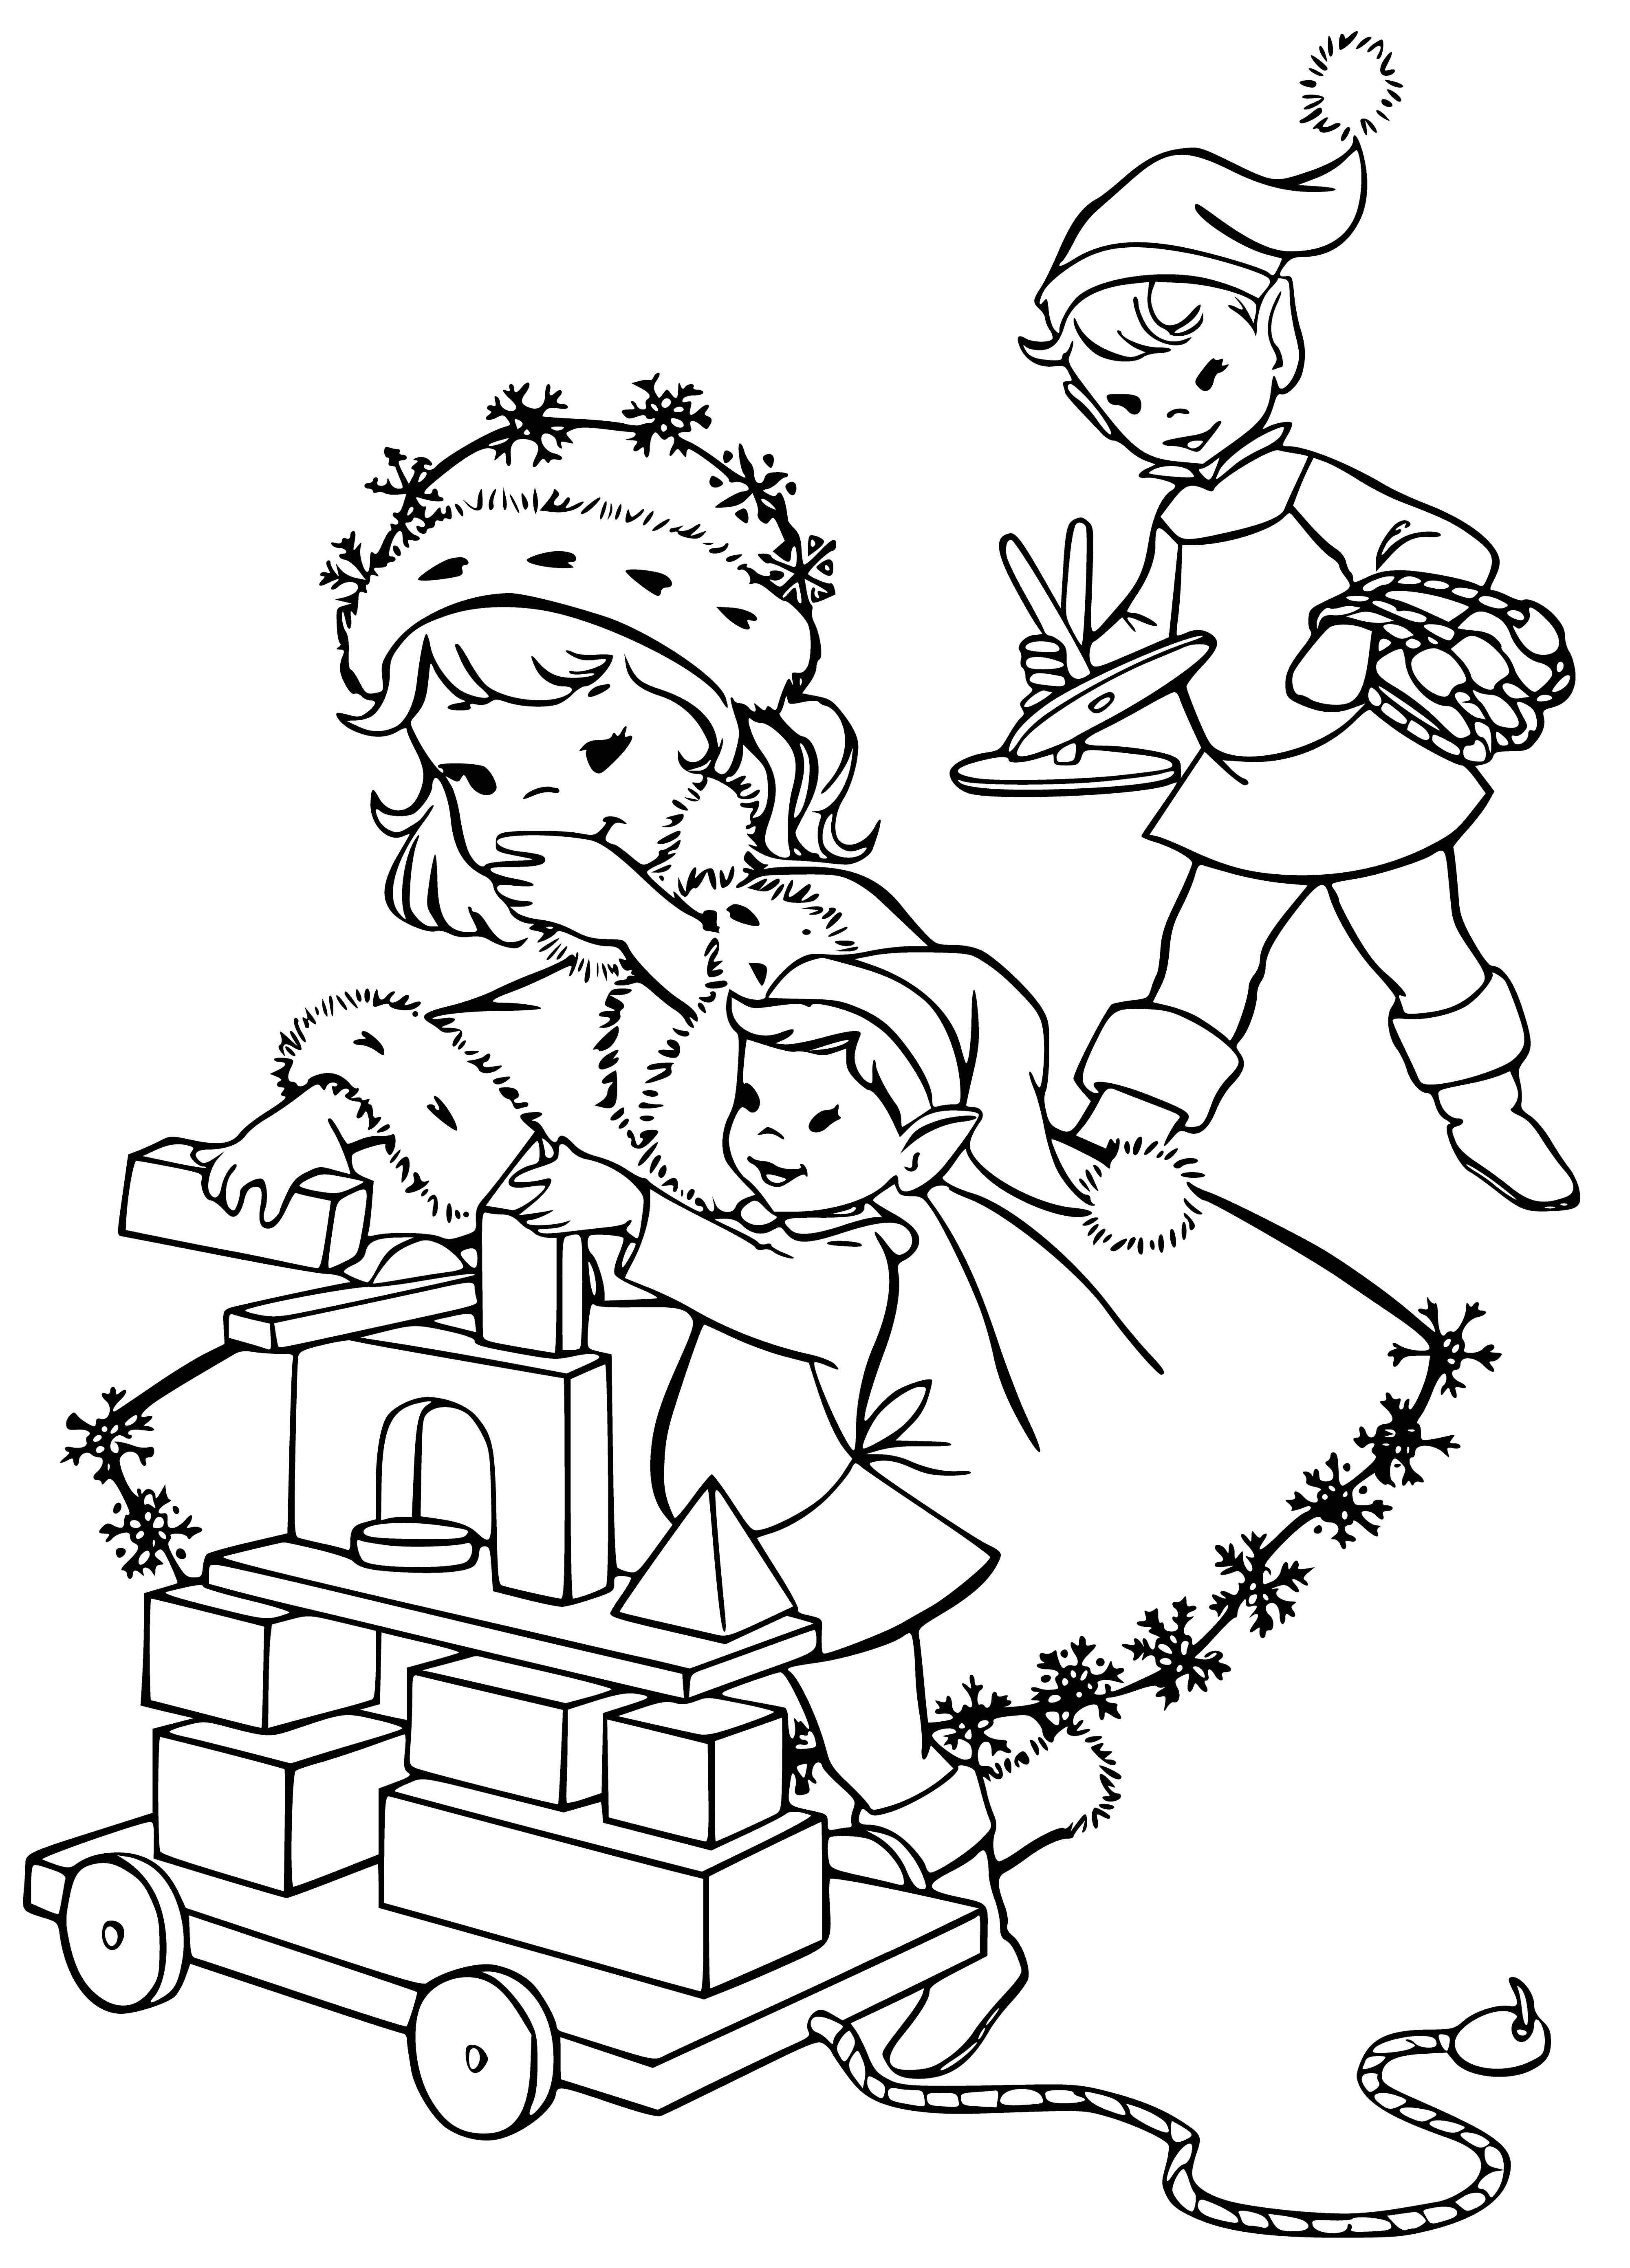 coloring page: Presents wrapped in red, green, & gold paper w/ red & gold bows. Some under the tree & others in front of it. #ChristmasGift #Wrapping